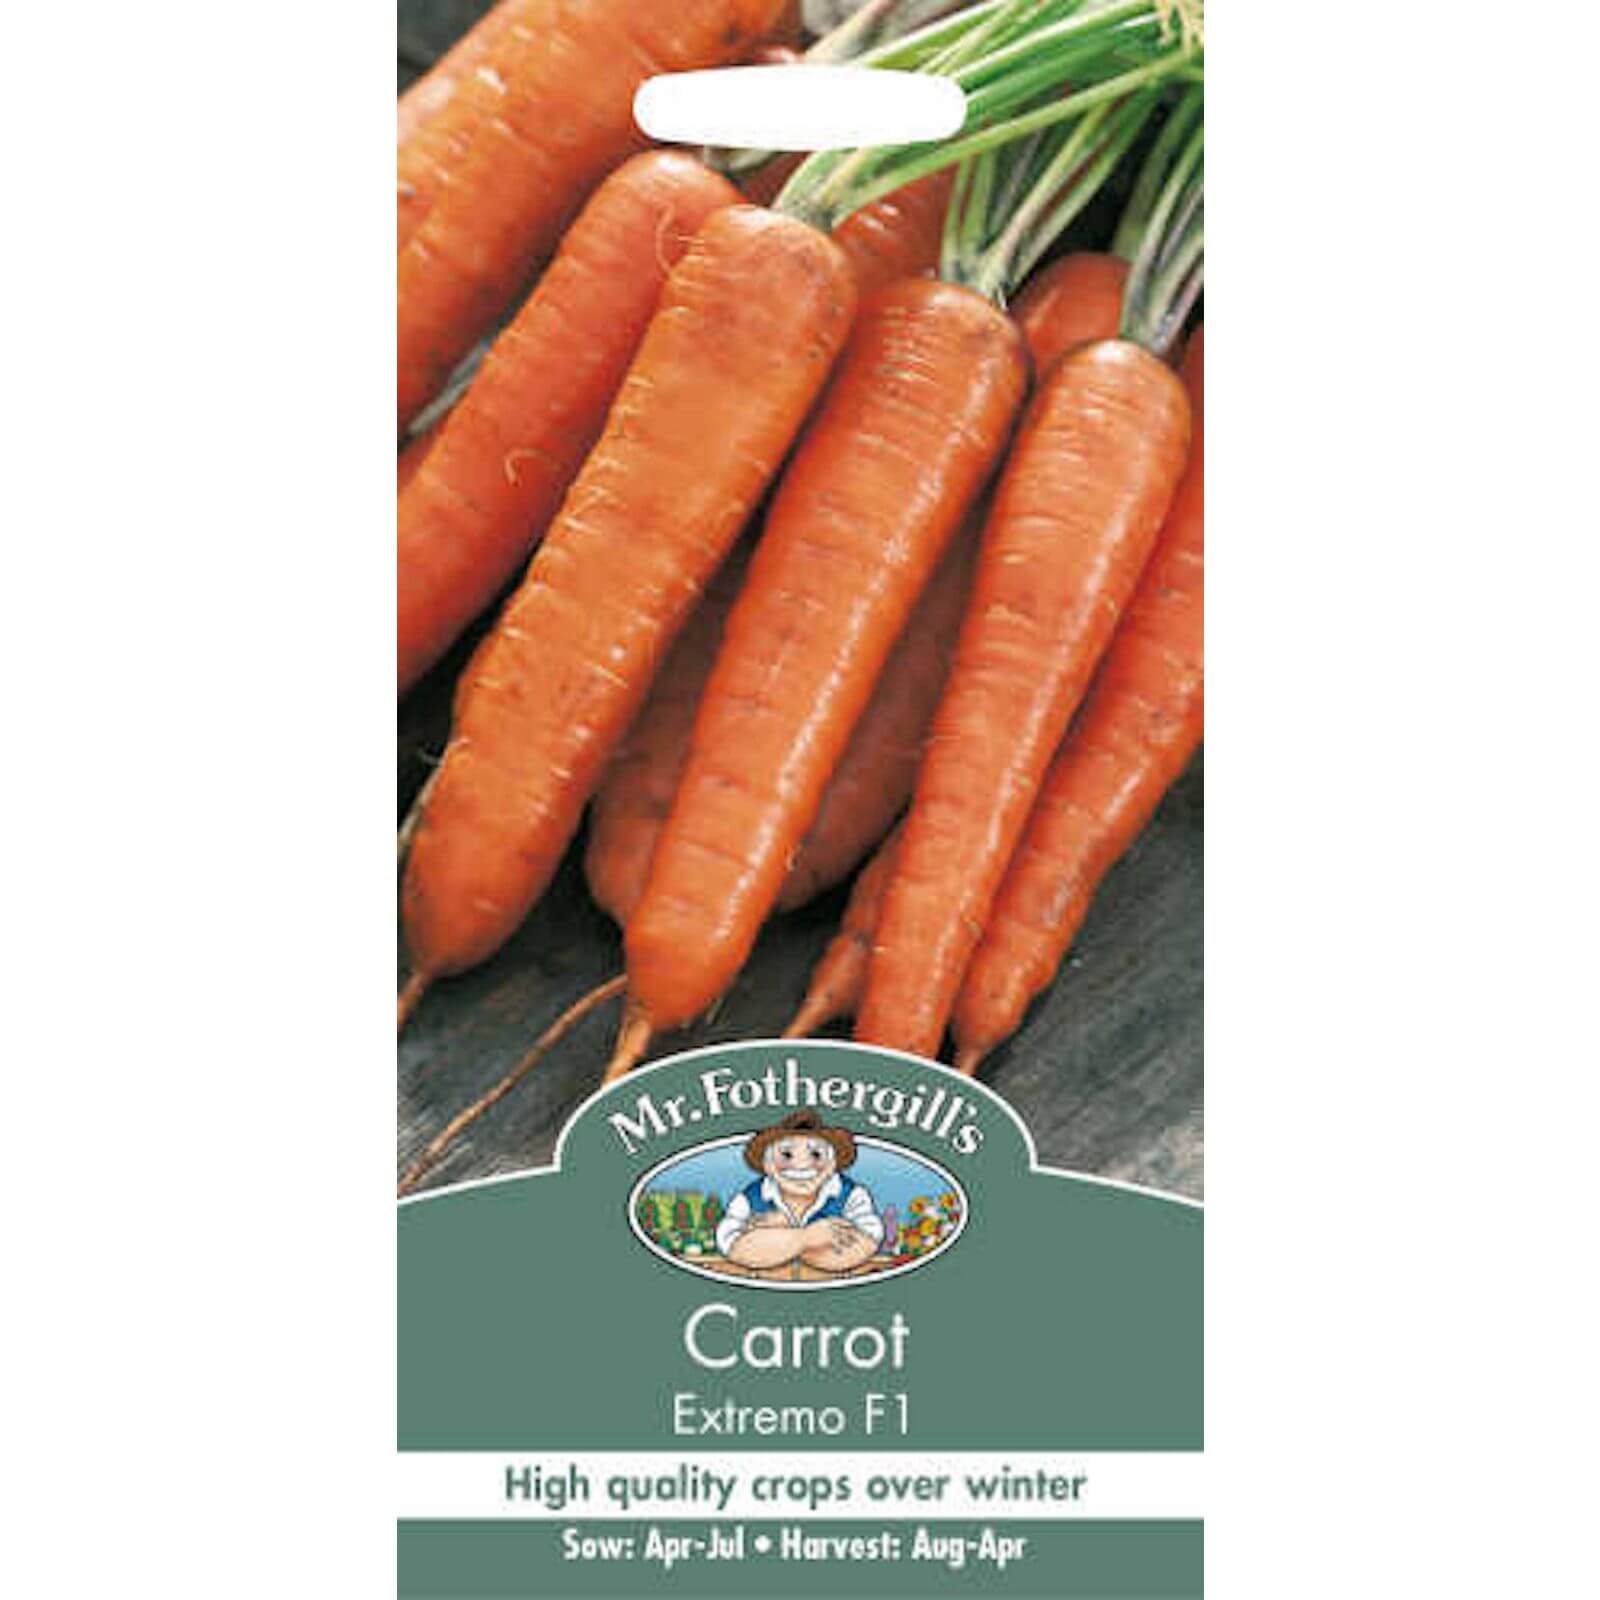 Mr. Fothergill's Carrot Extremo F1 Seeds